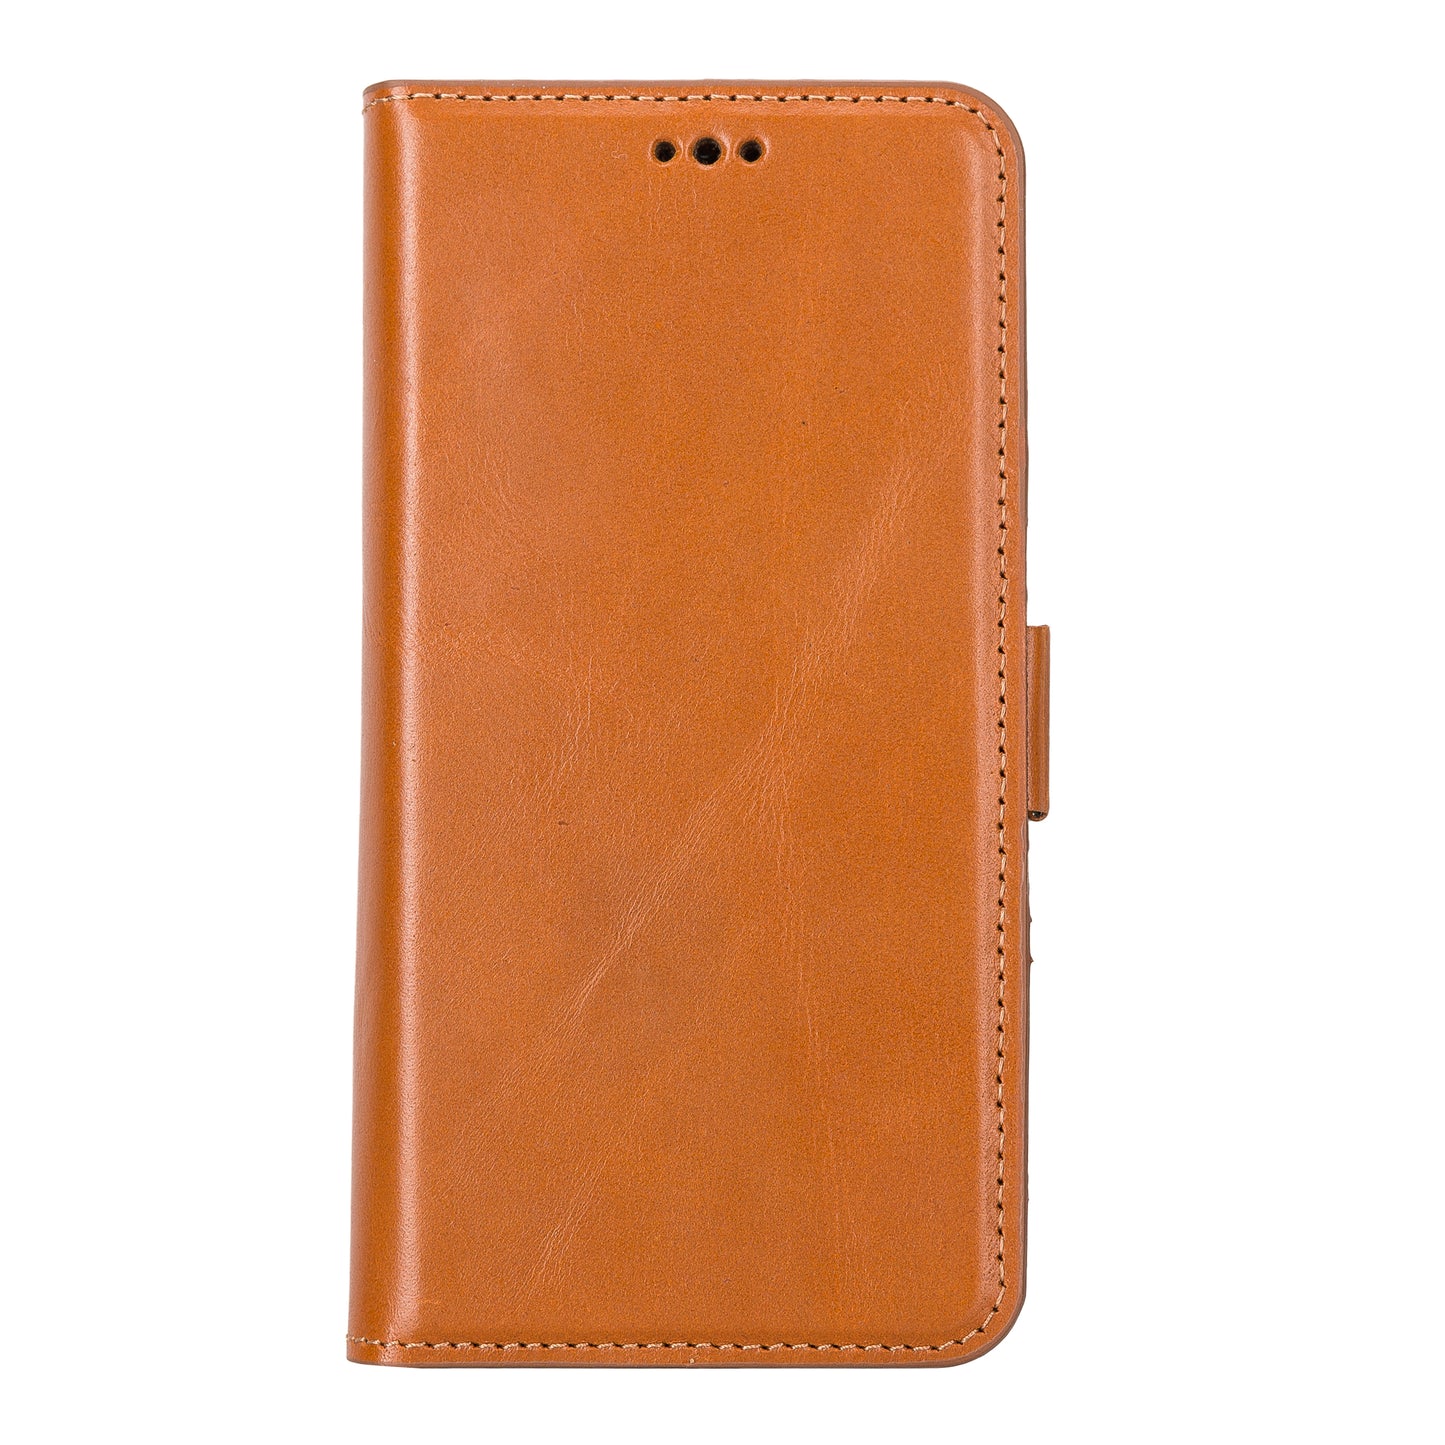 Samsung Galaxy S22 (6.1") Leather Wallet Case - Brown